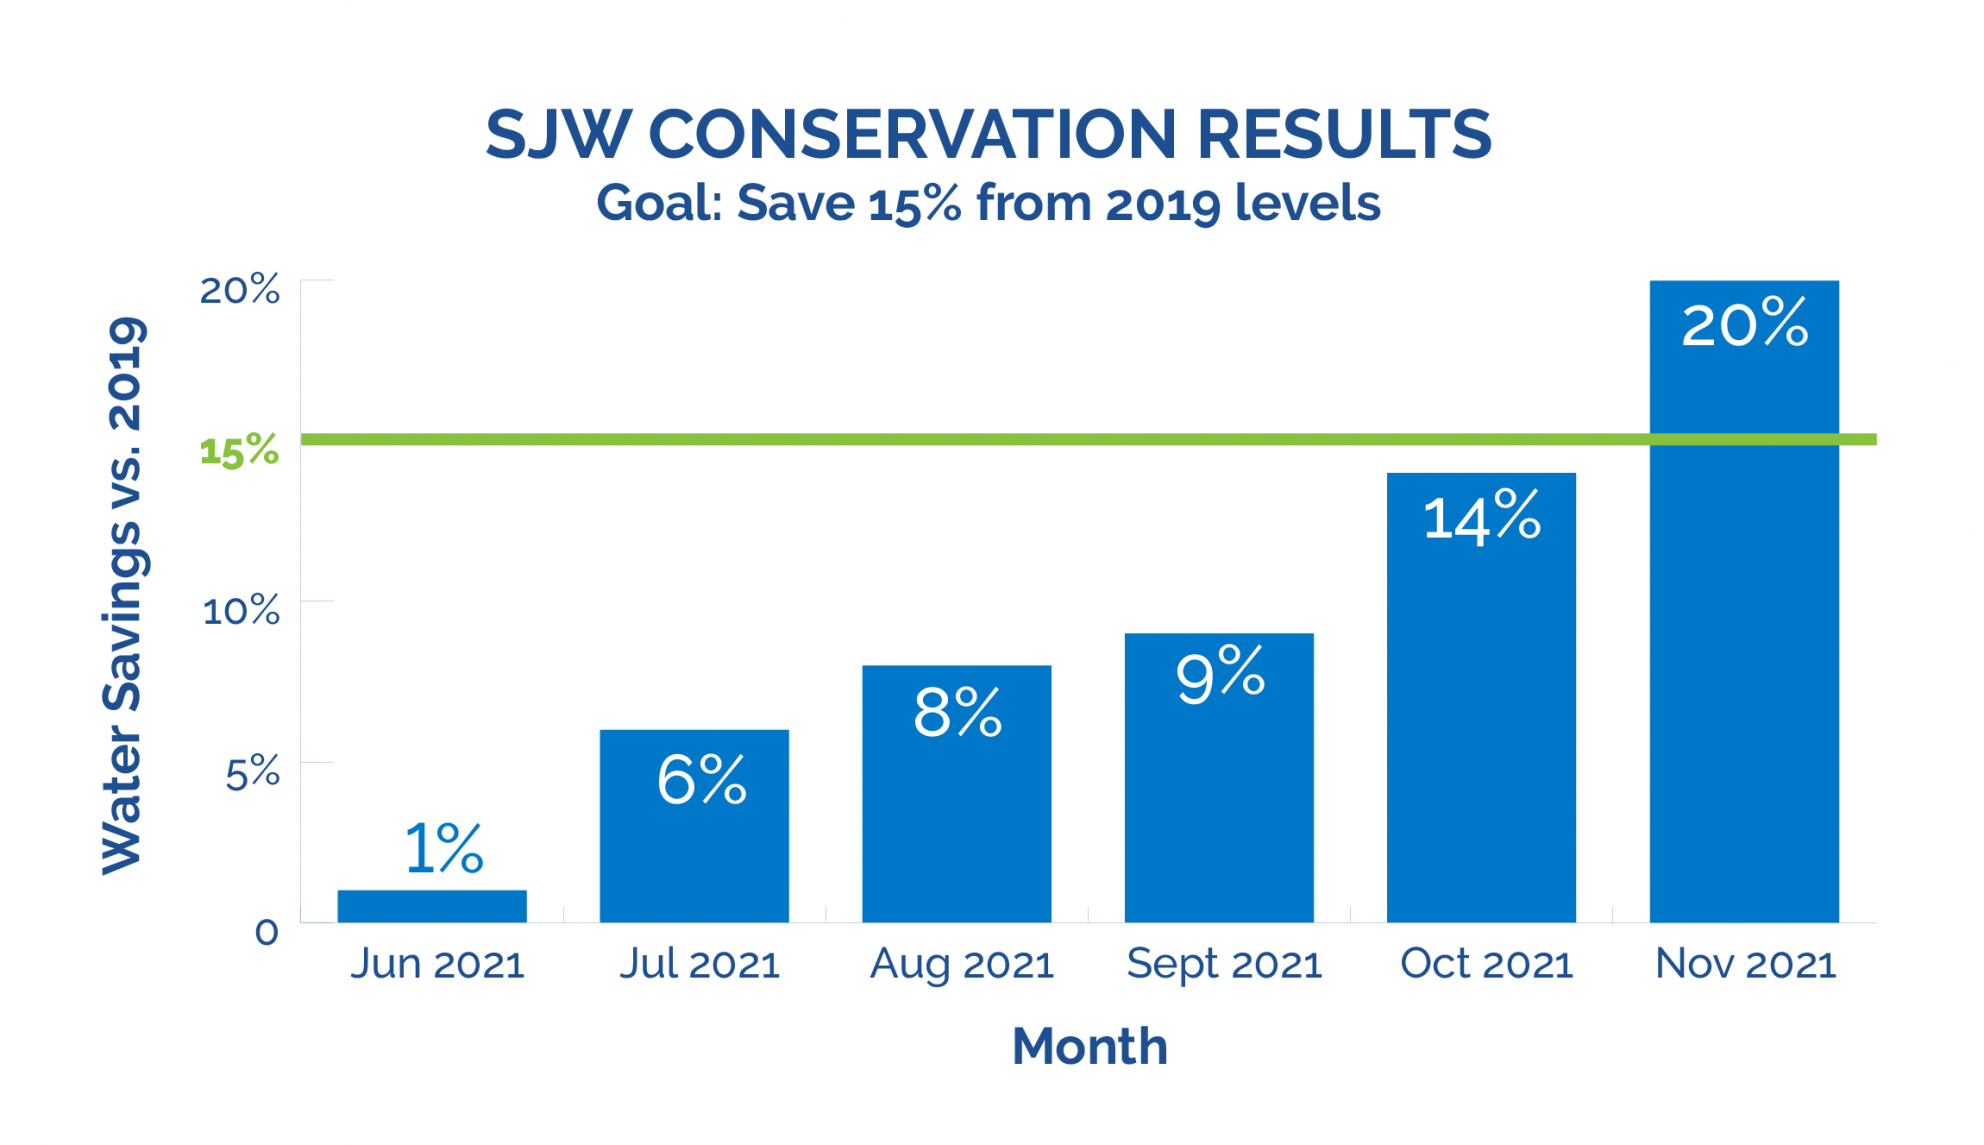 SJW Conservation Results - Goal: Save 15% from 2019 Levels